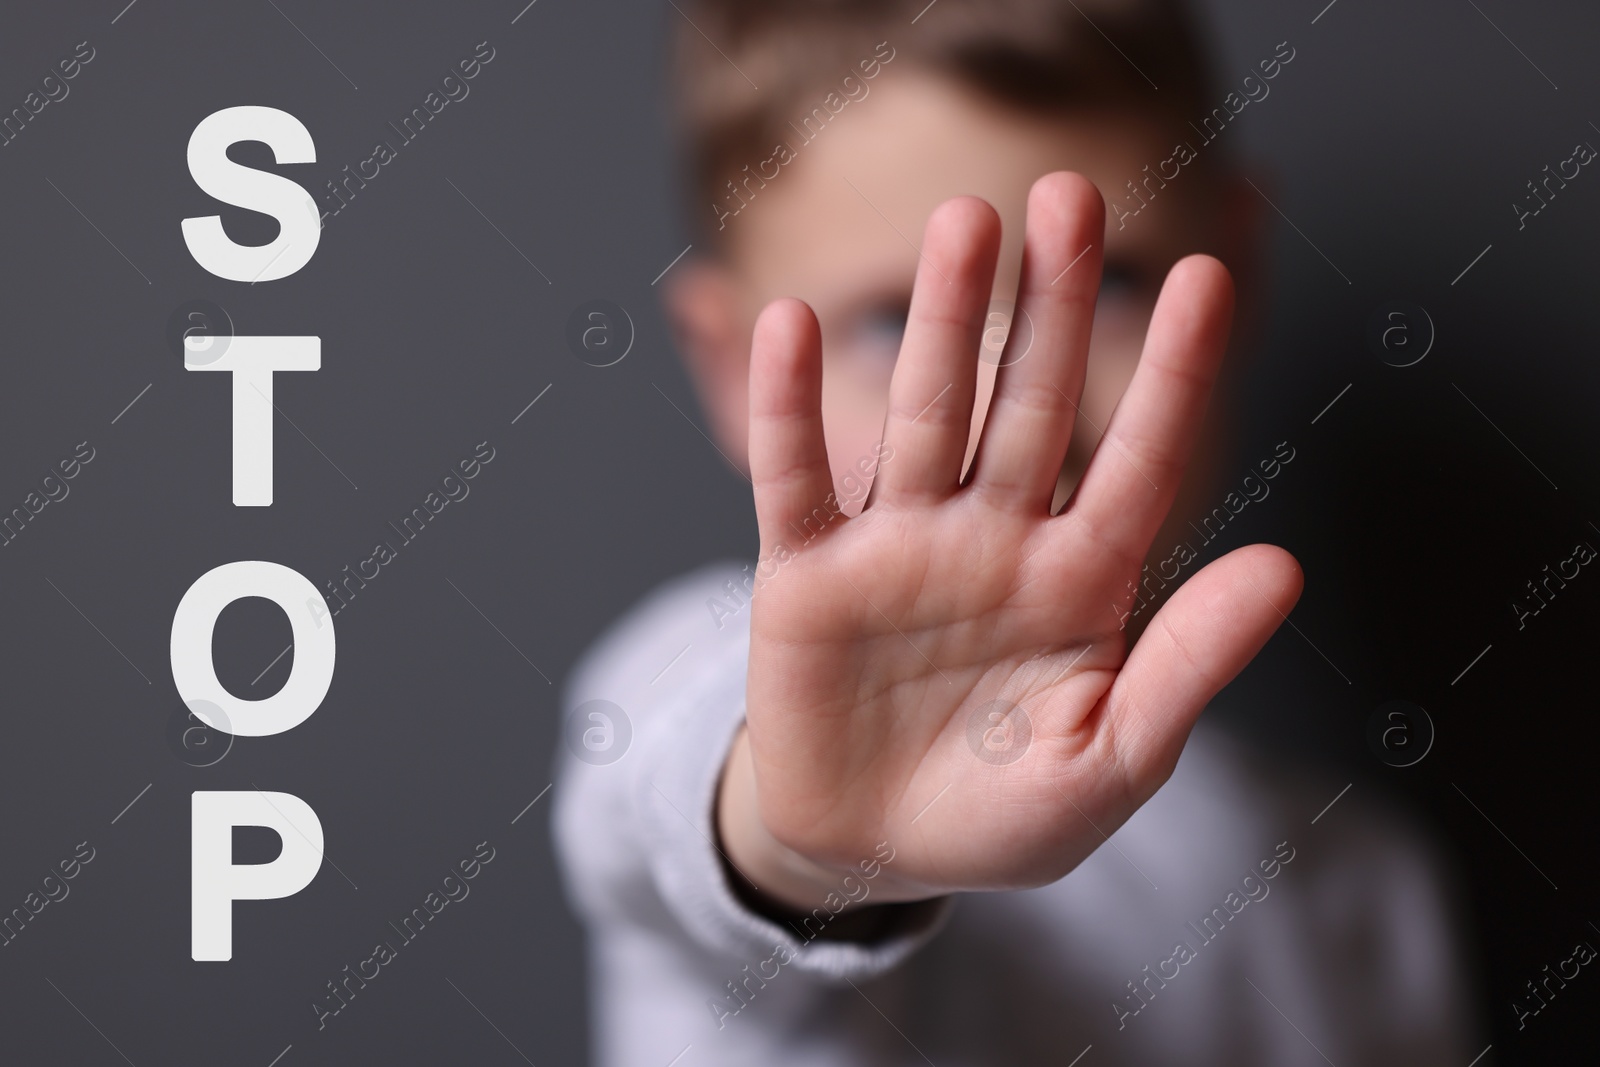 Image of No child abuse. Boy making stop gesture on grey background, selective focus